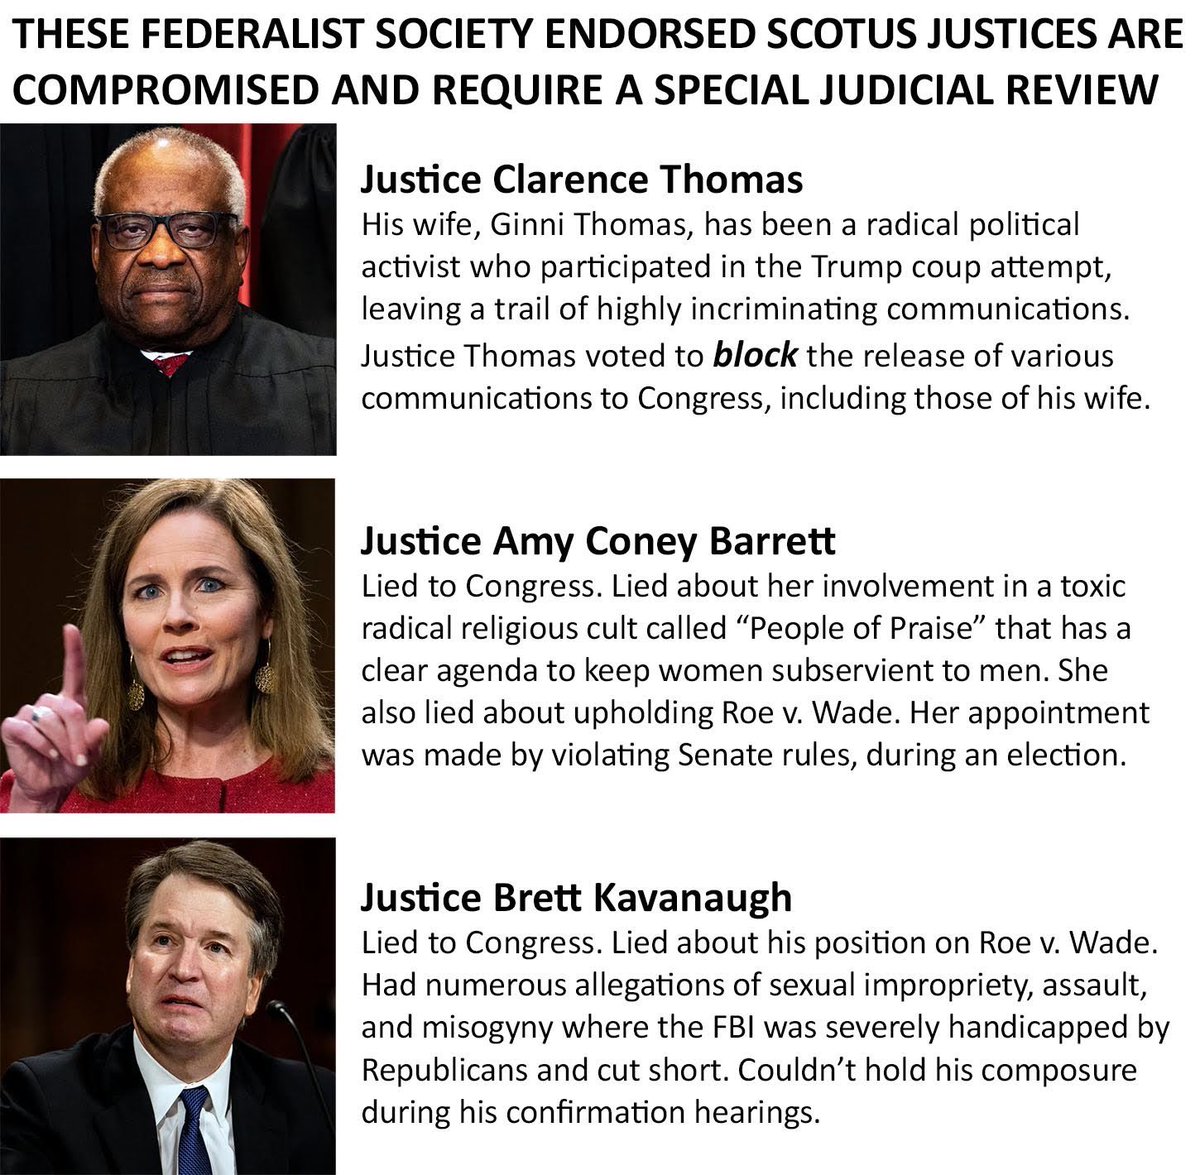 The decision to over turn Roe v. Wade by these 'compromised' justices should NOT STAND!
#TheyAllLied